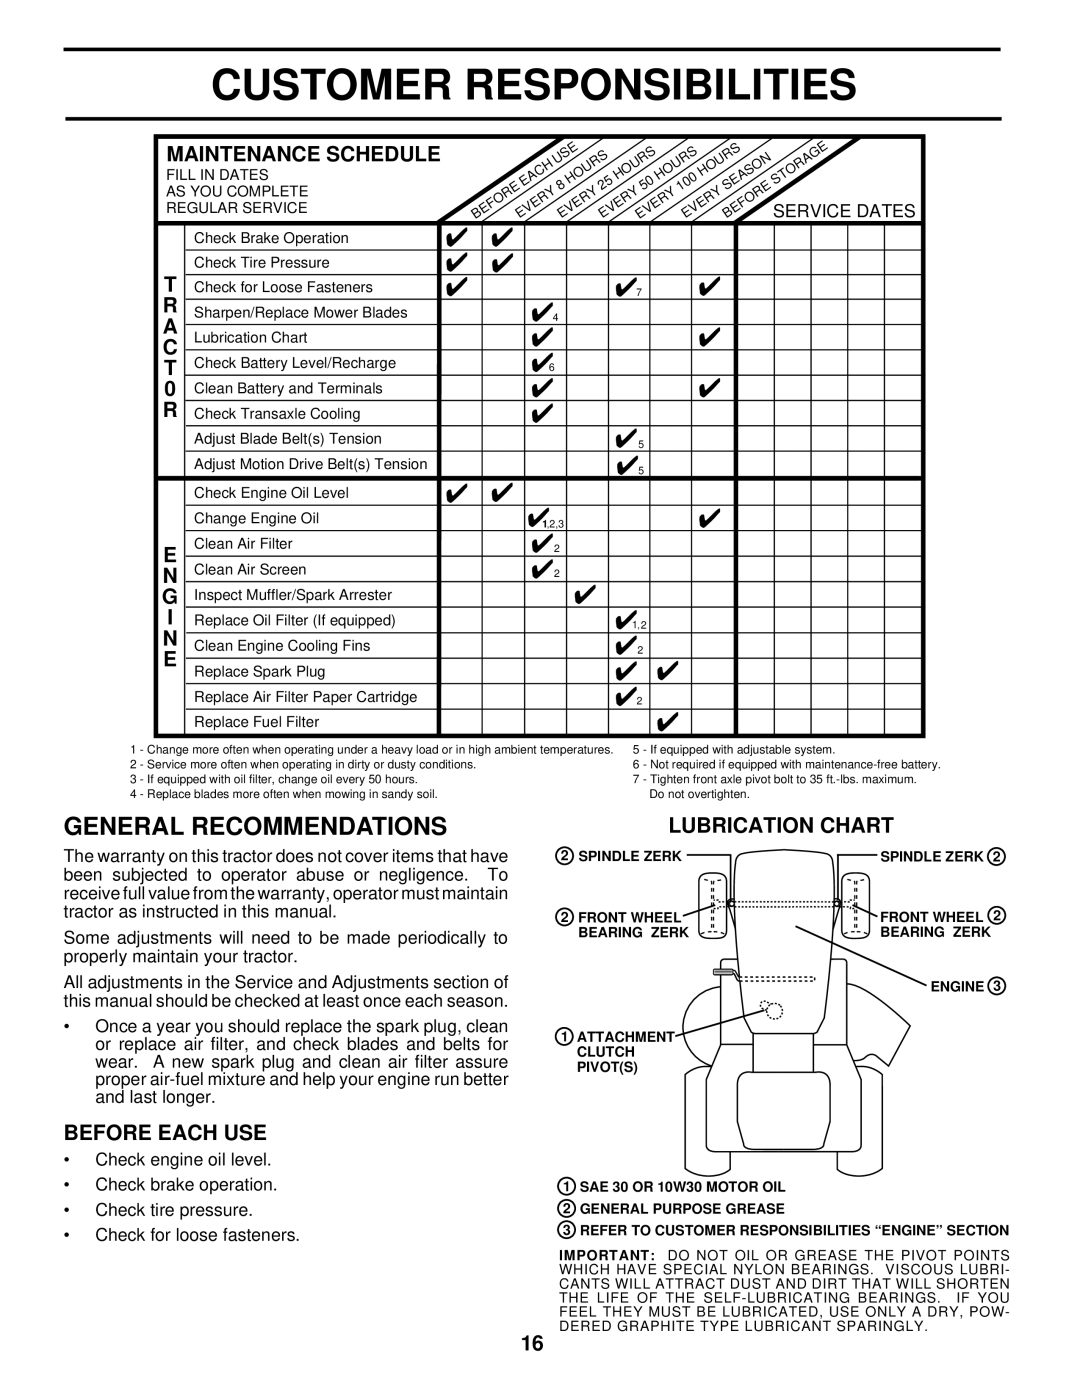 Husqvarna LTH130 owner manual Customer Responsibilities, General Recommendations, Lubrication Chart, Before Each Use 